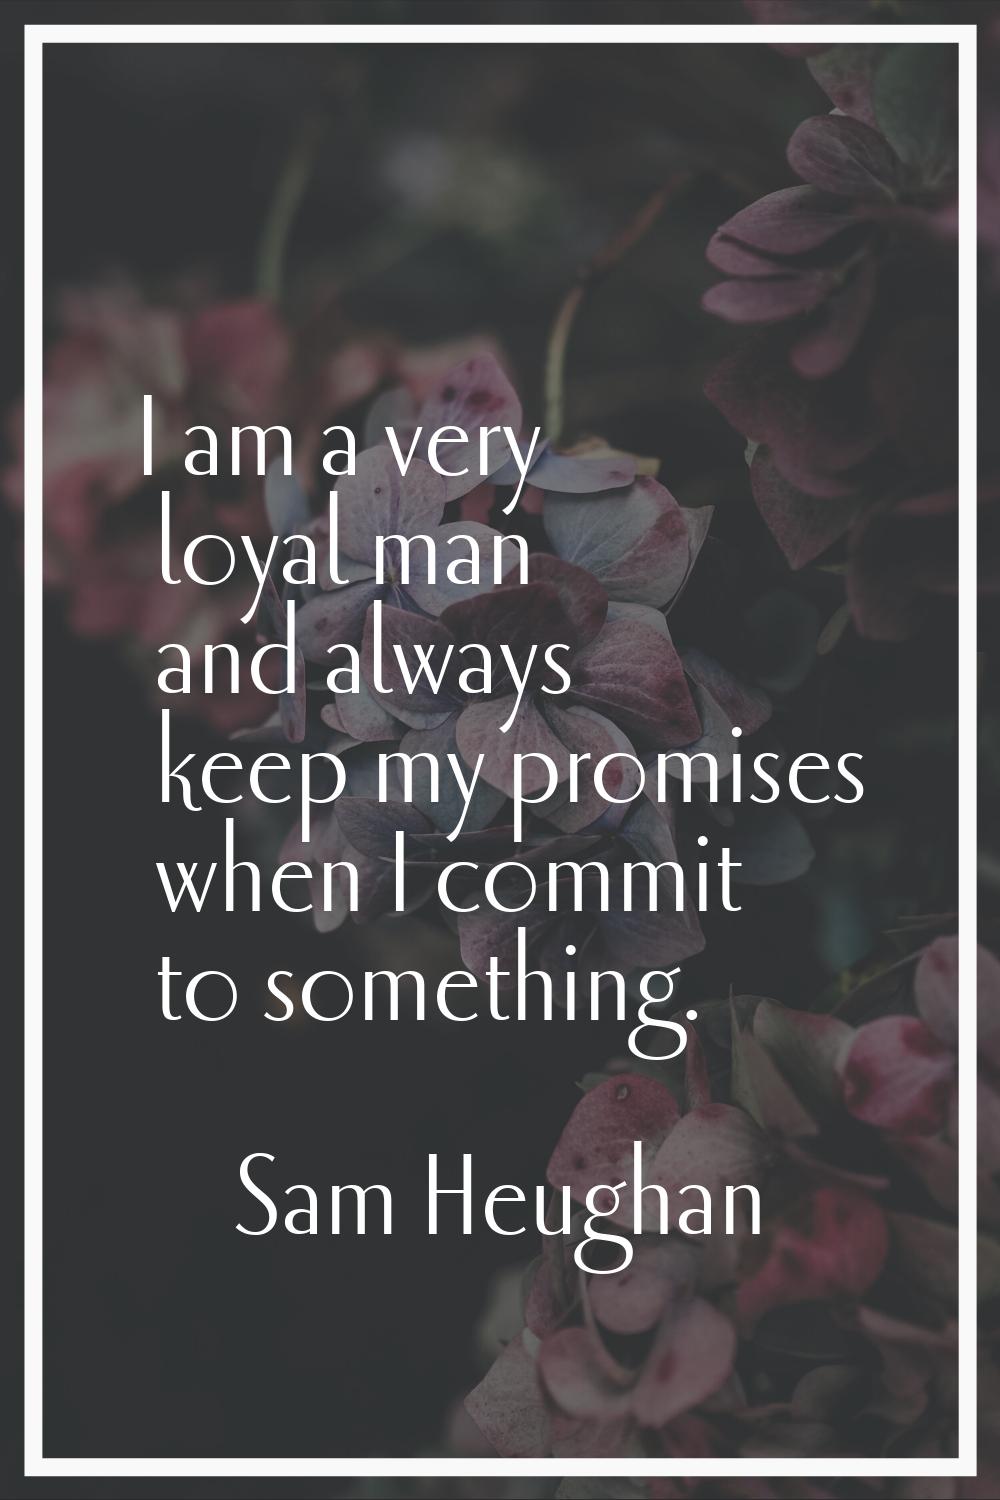 I am a very loyal man and always keep my promises when I commit to something.